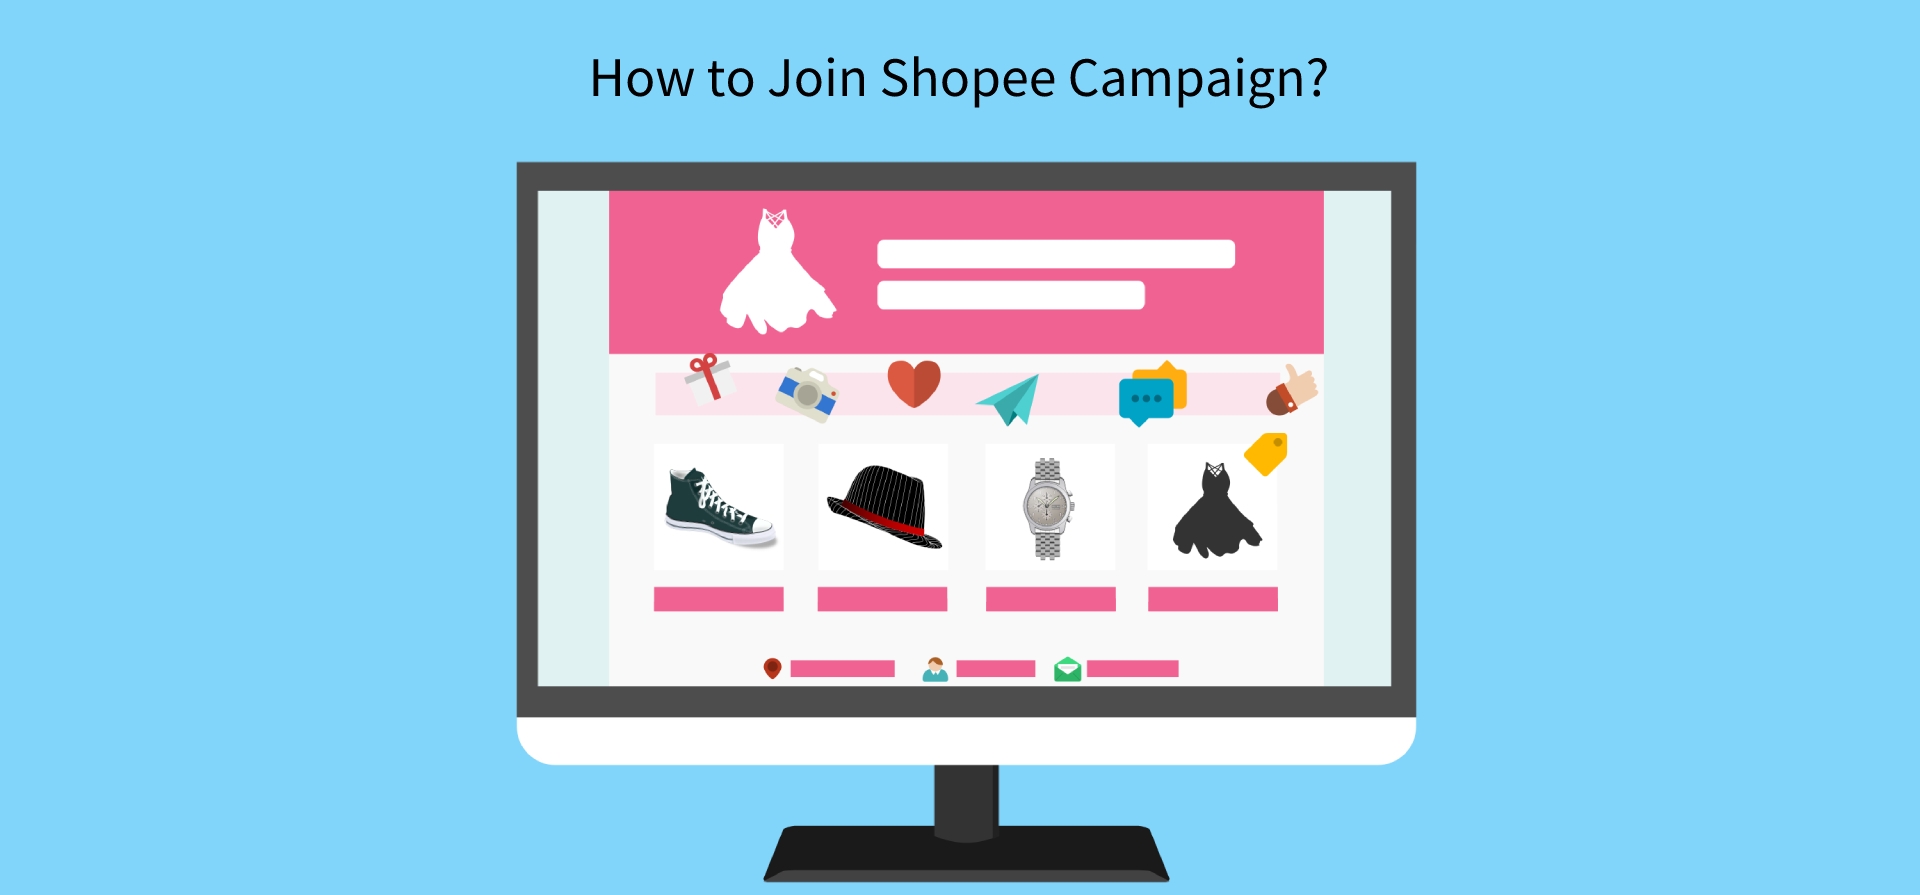 How to Join Shopee Campaign?